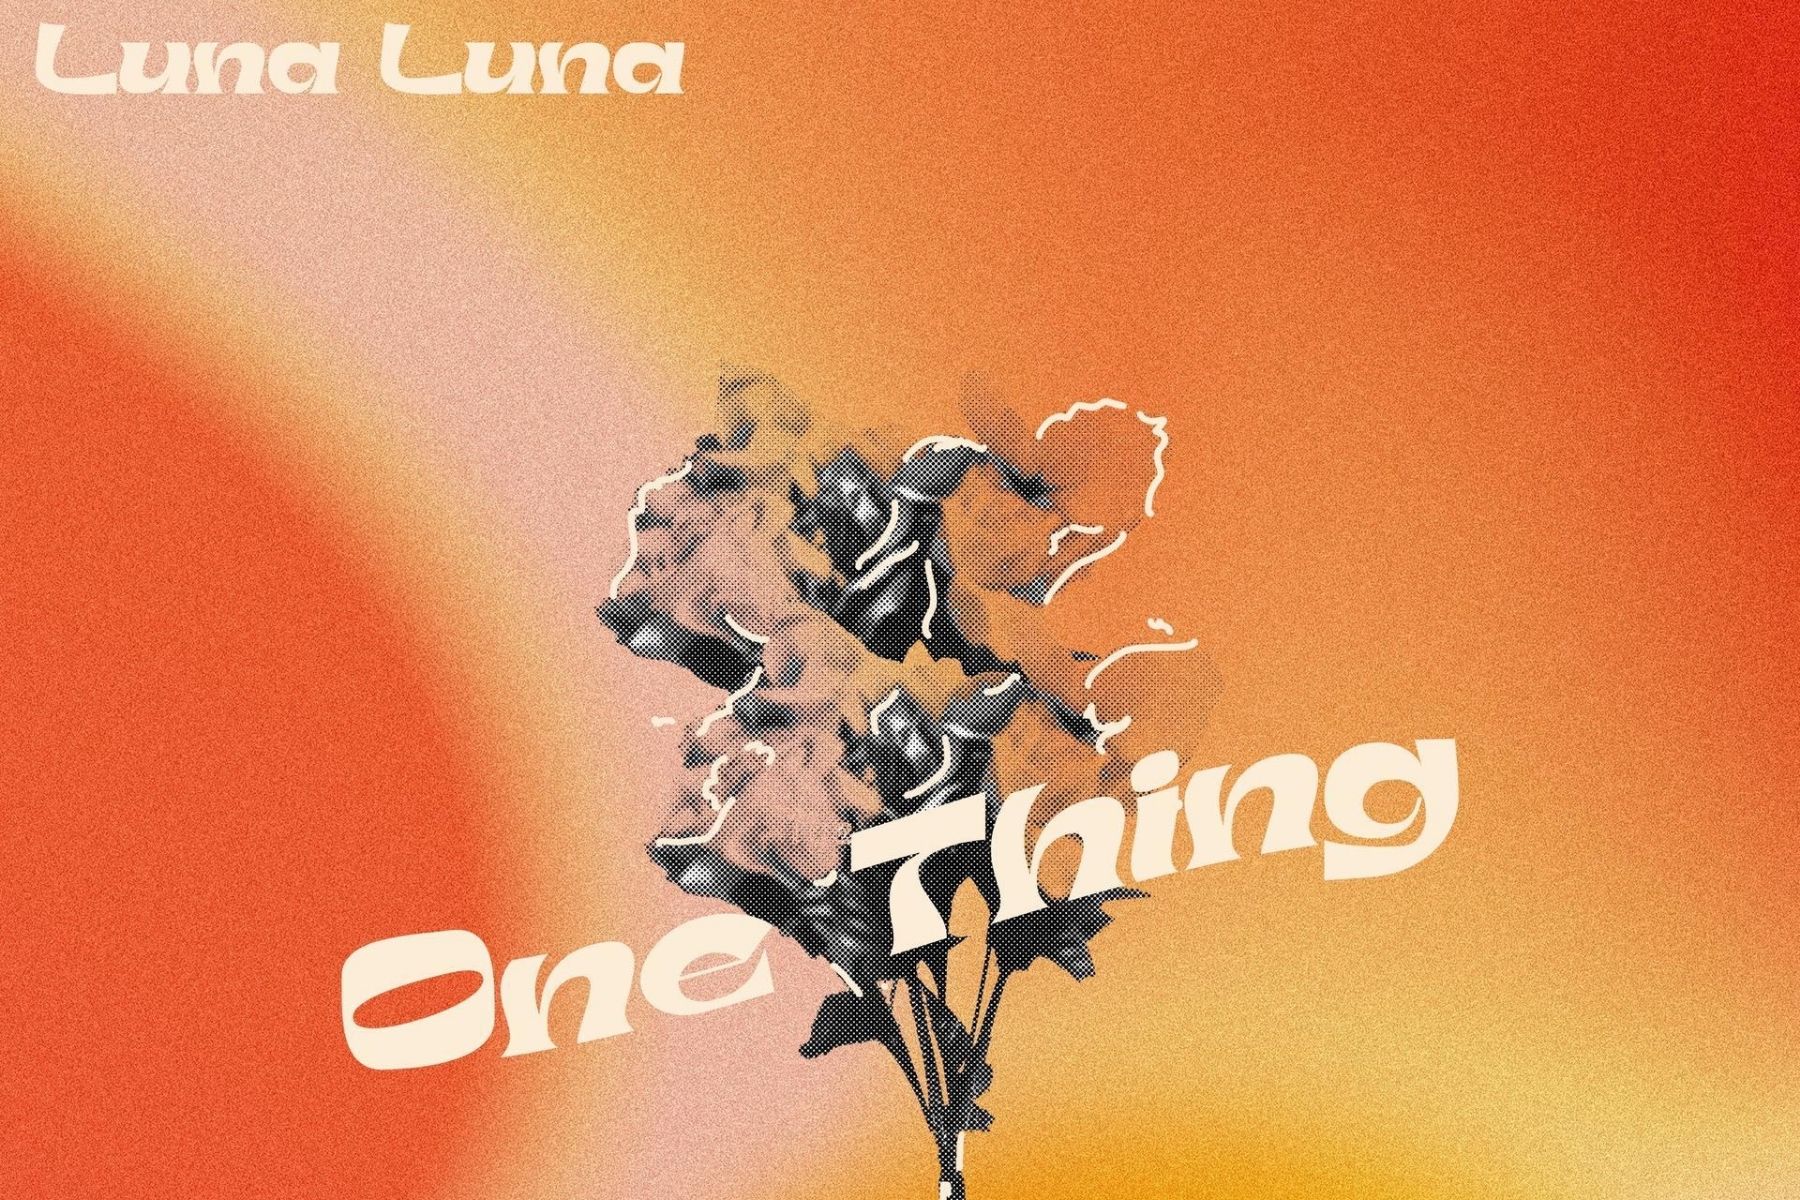 Cover art of One Thing, the latest single from Luna Luna